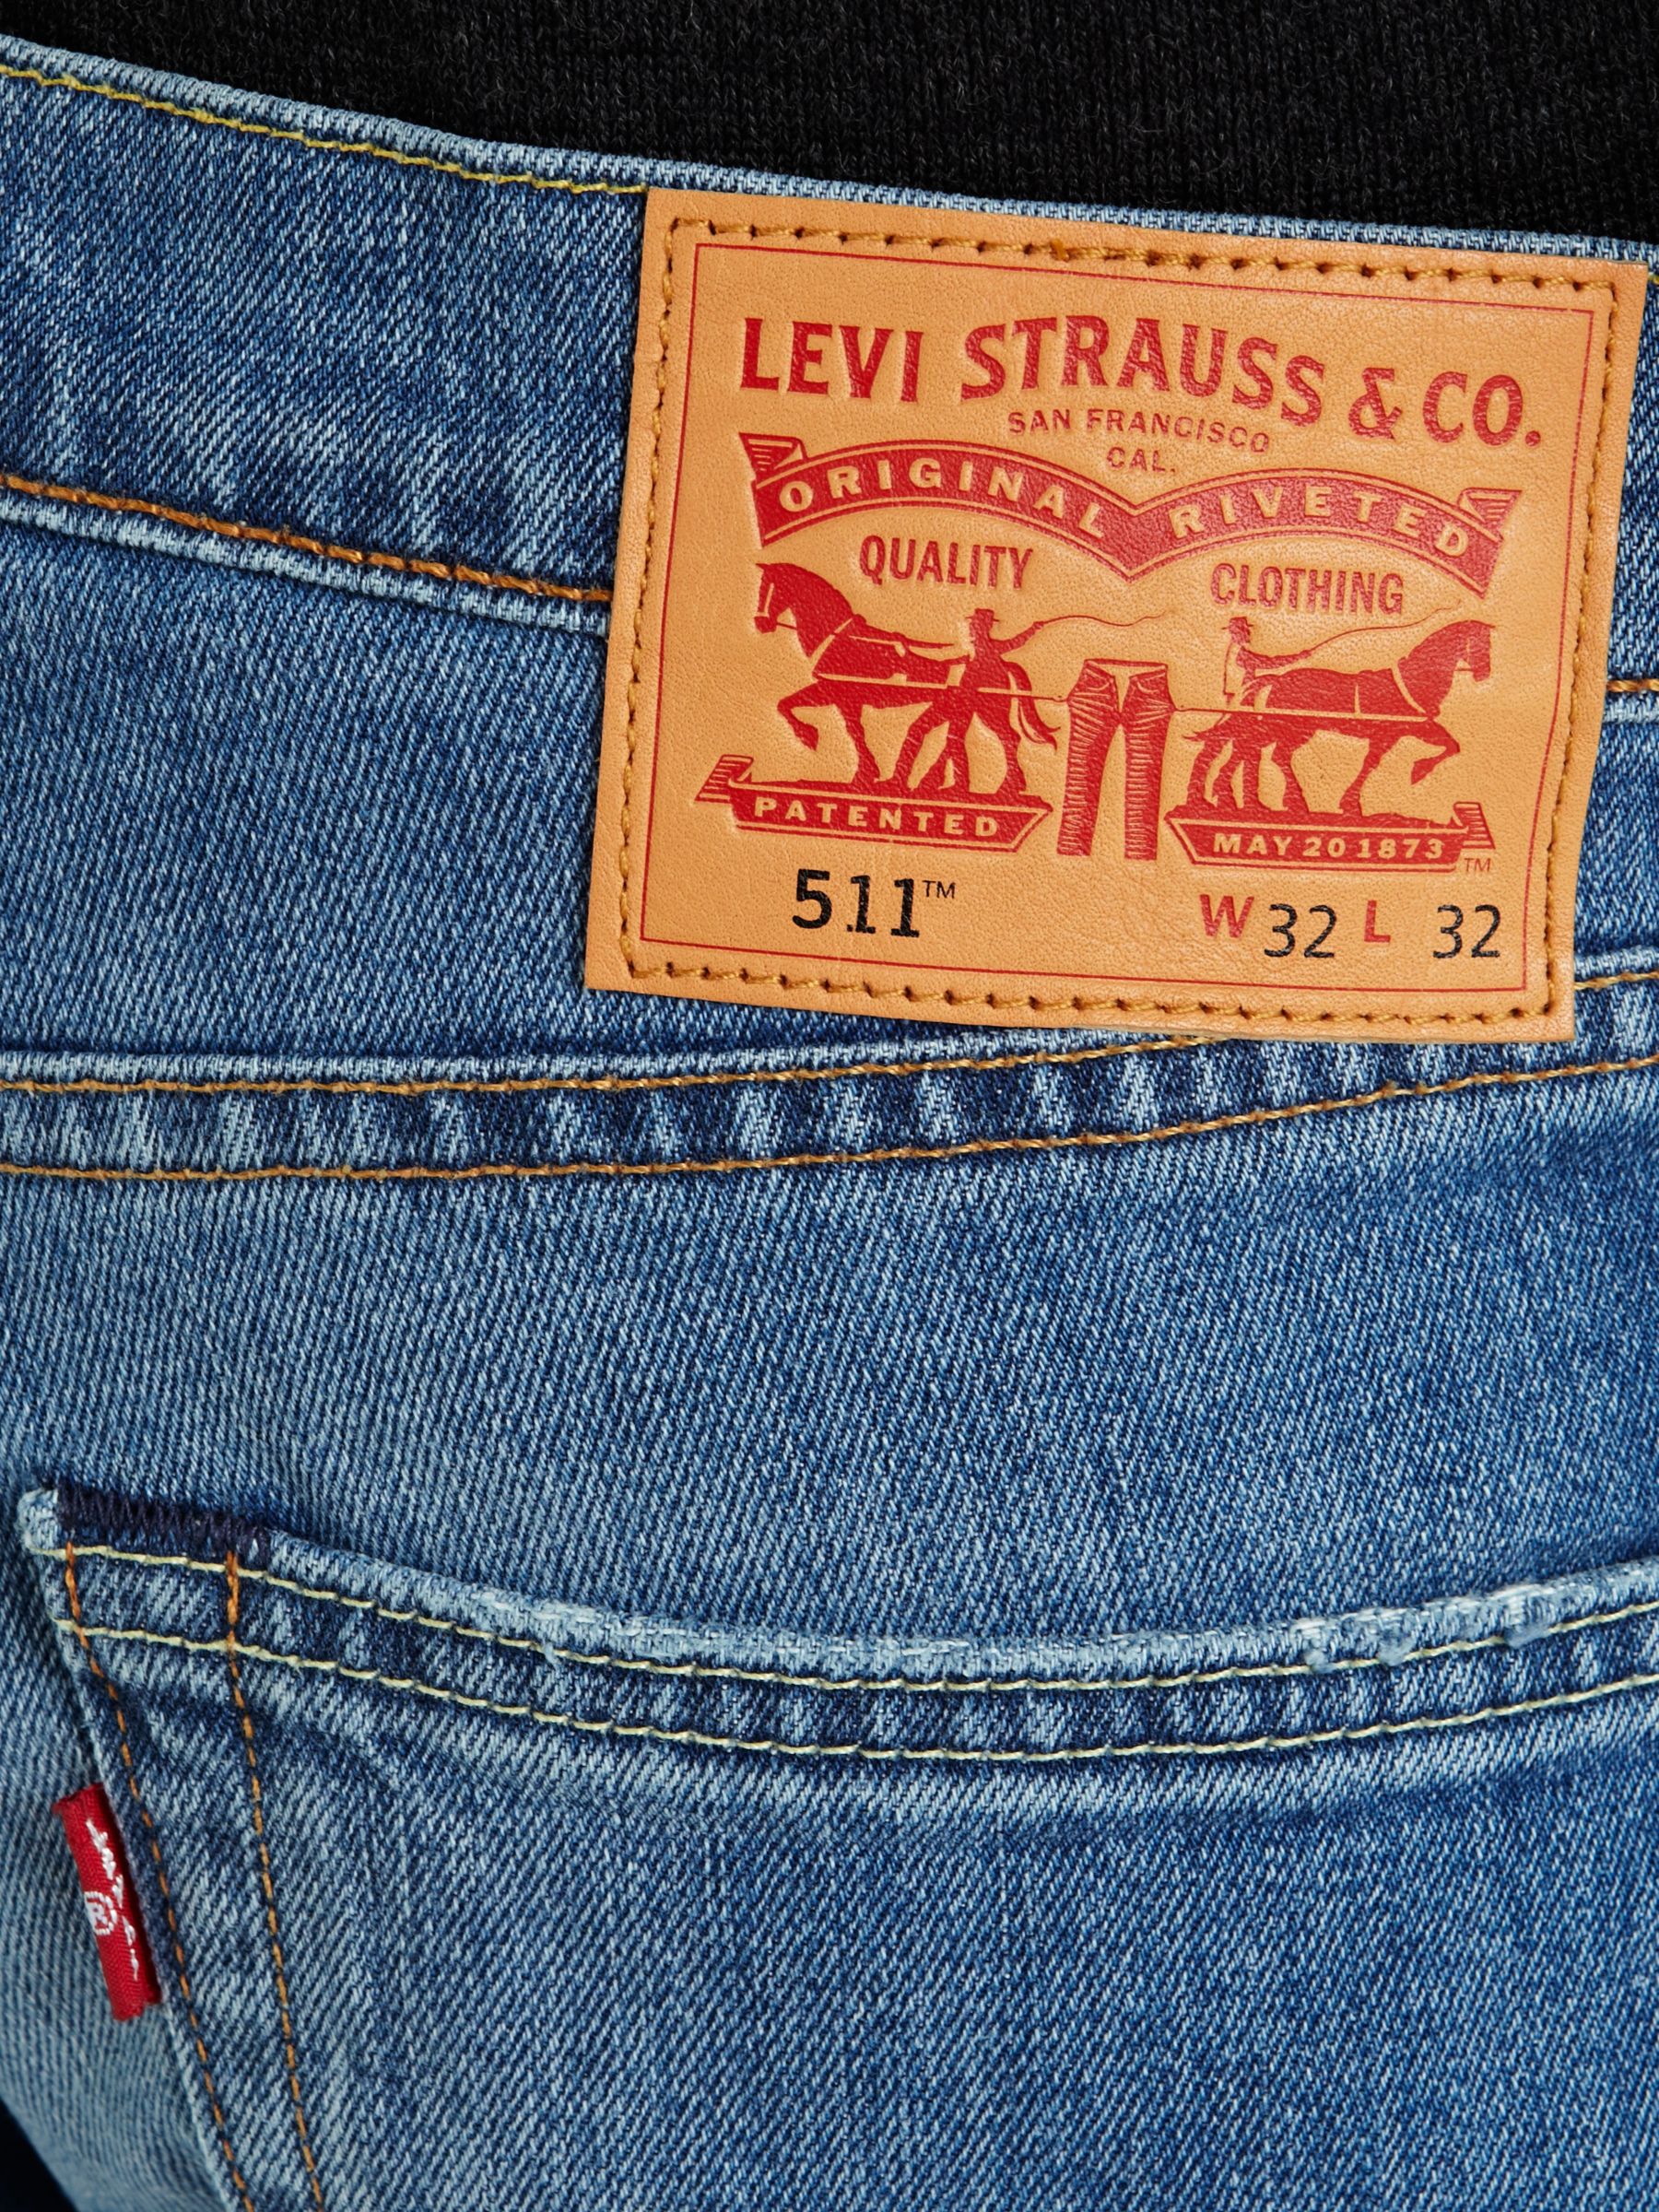 levis may 20 1873 